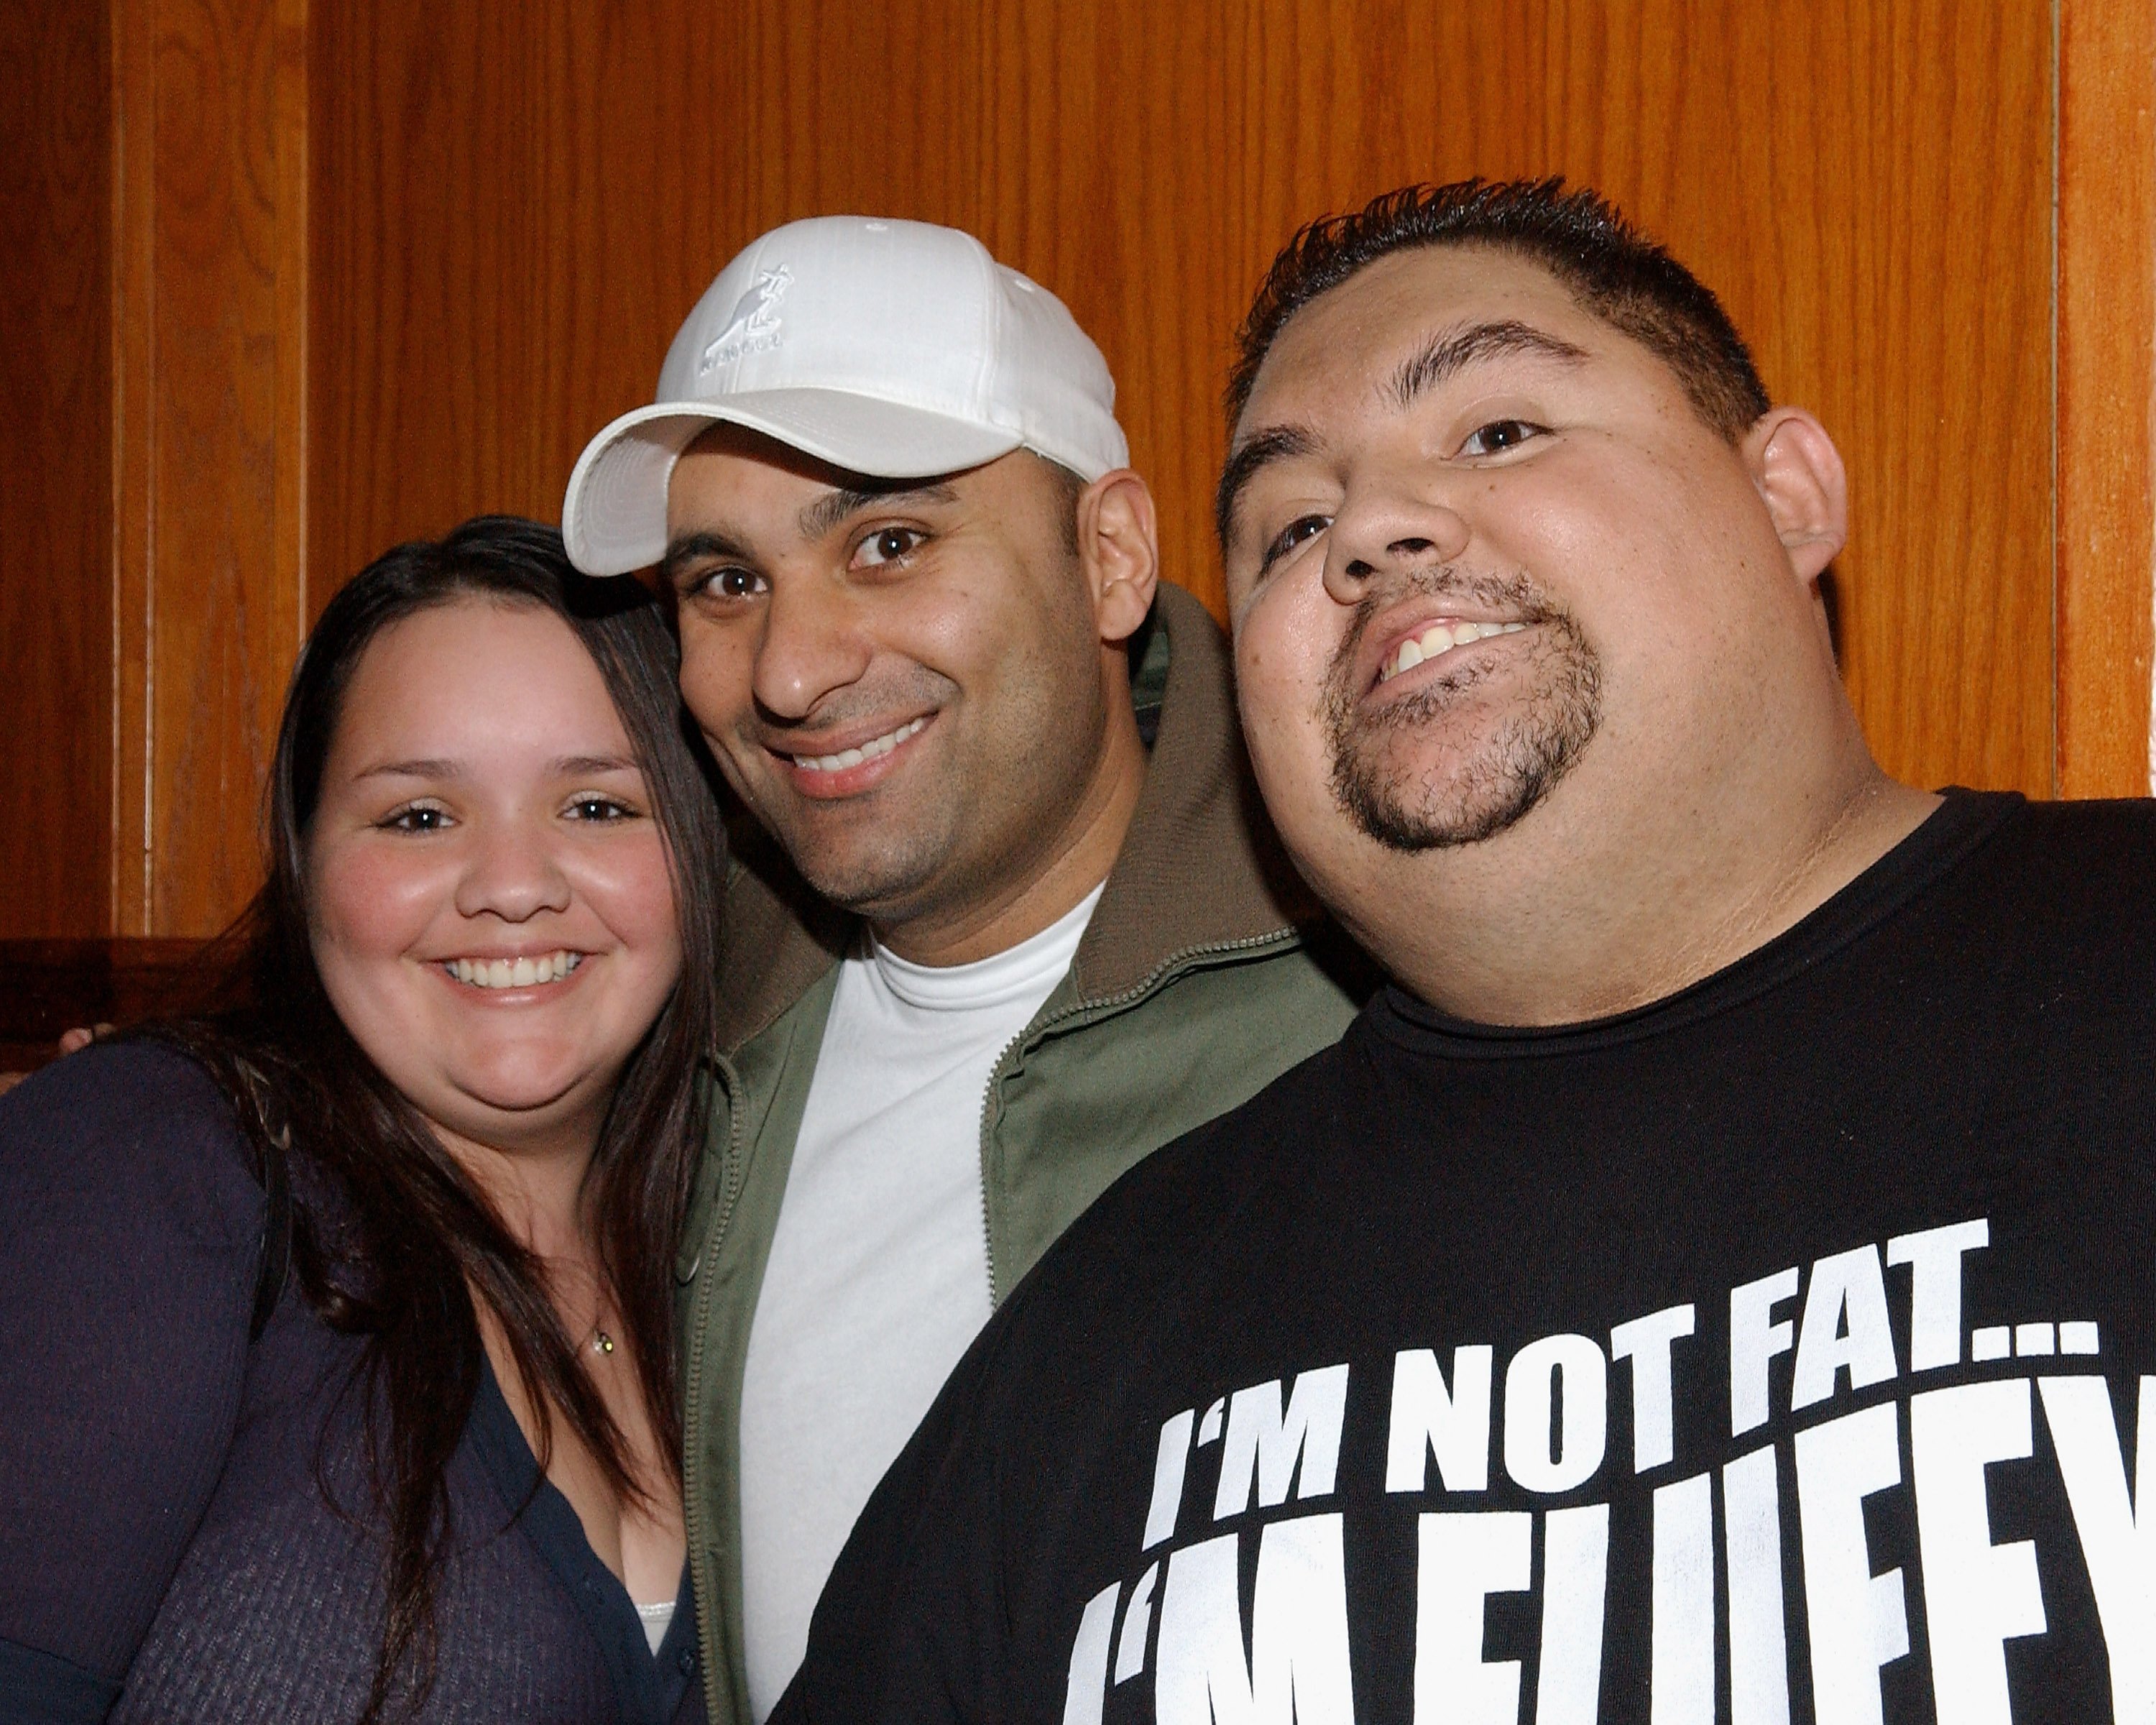 Claudia Valdez, Russel Peters, and Gabriel Iglesias at the Laugh Factory on February 12, 2008, in Los Angeles, California. | Source: Getty Images